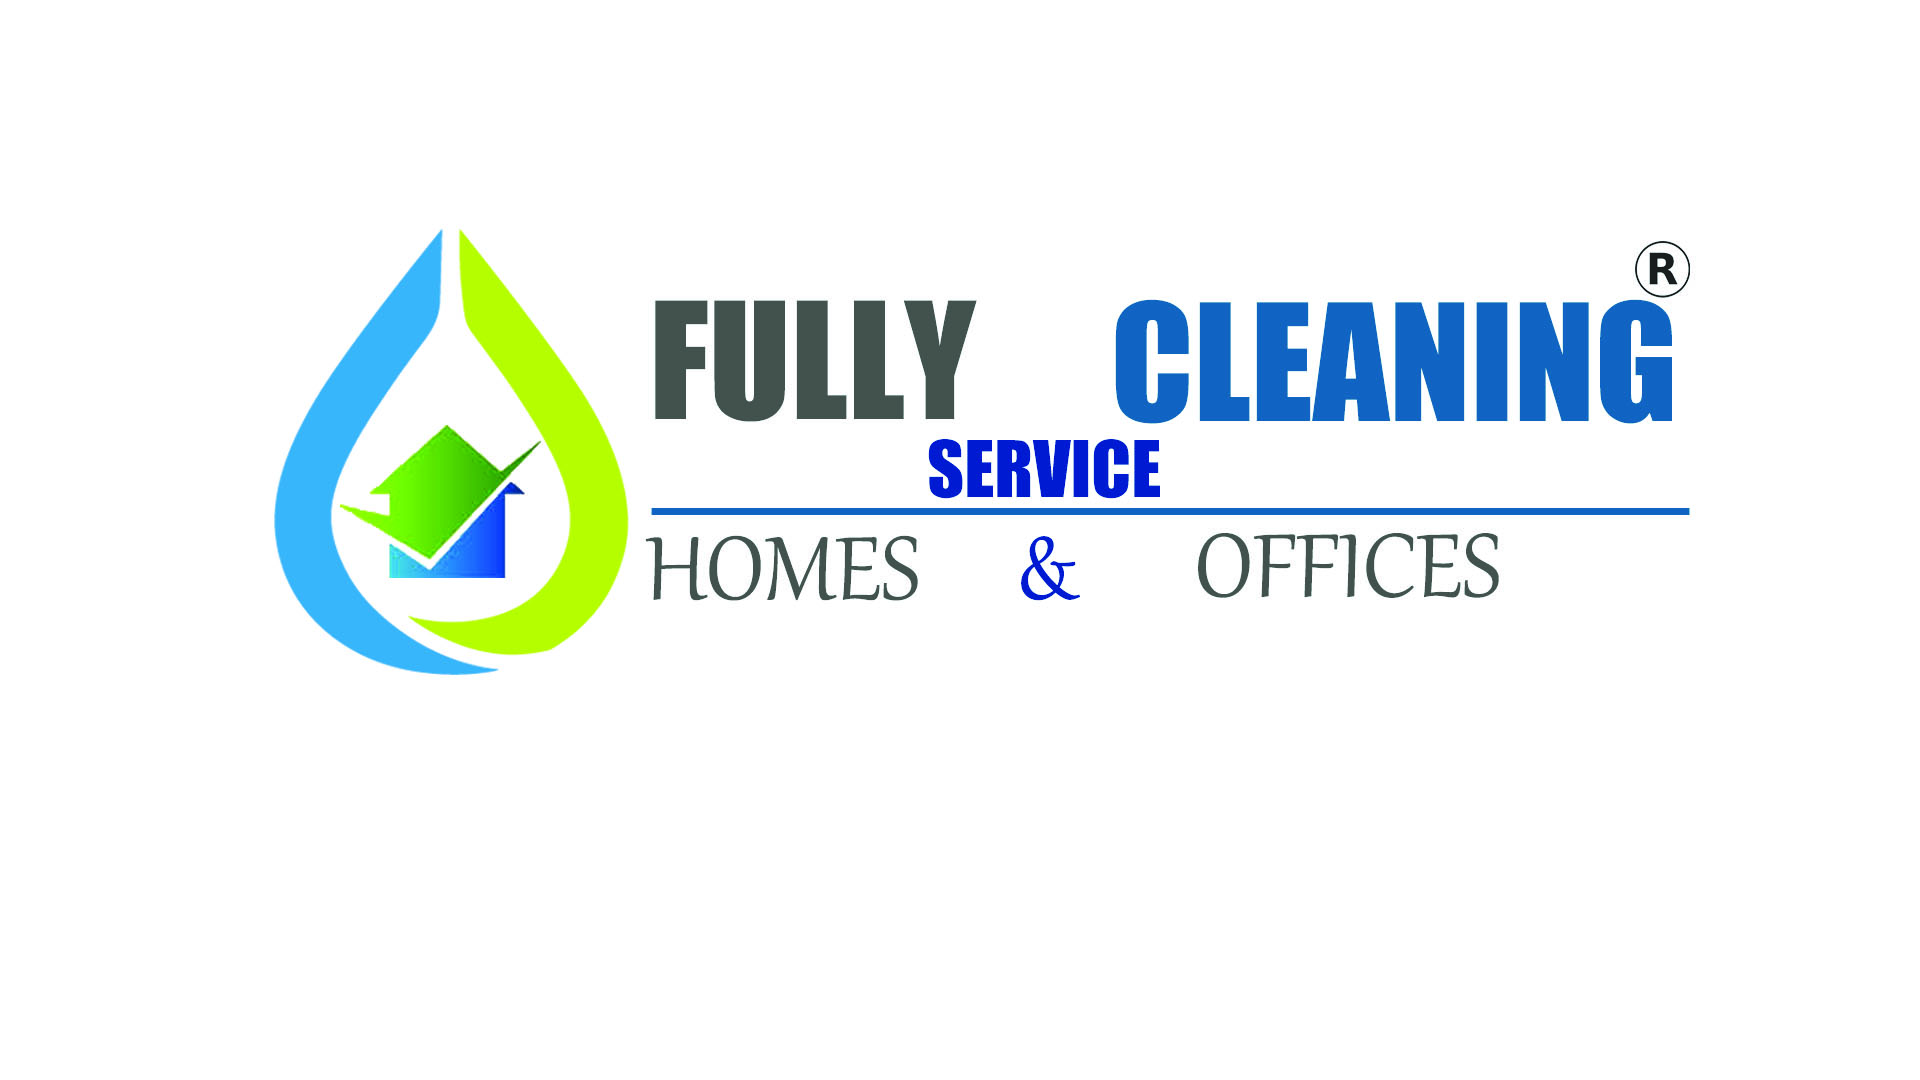 Fully Cleaning Service: Homes & Offices